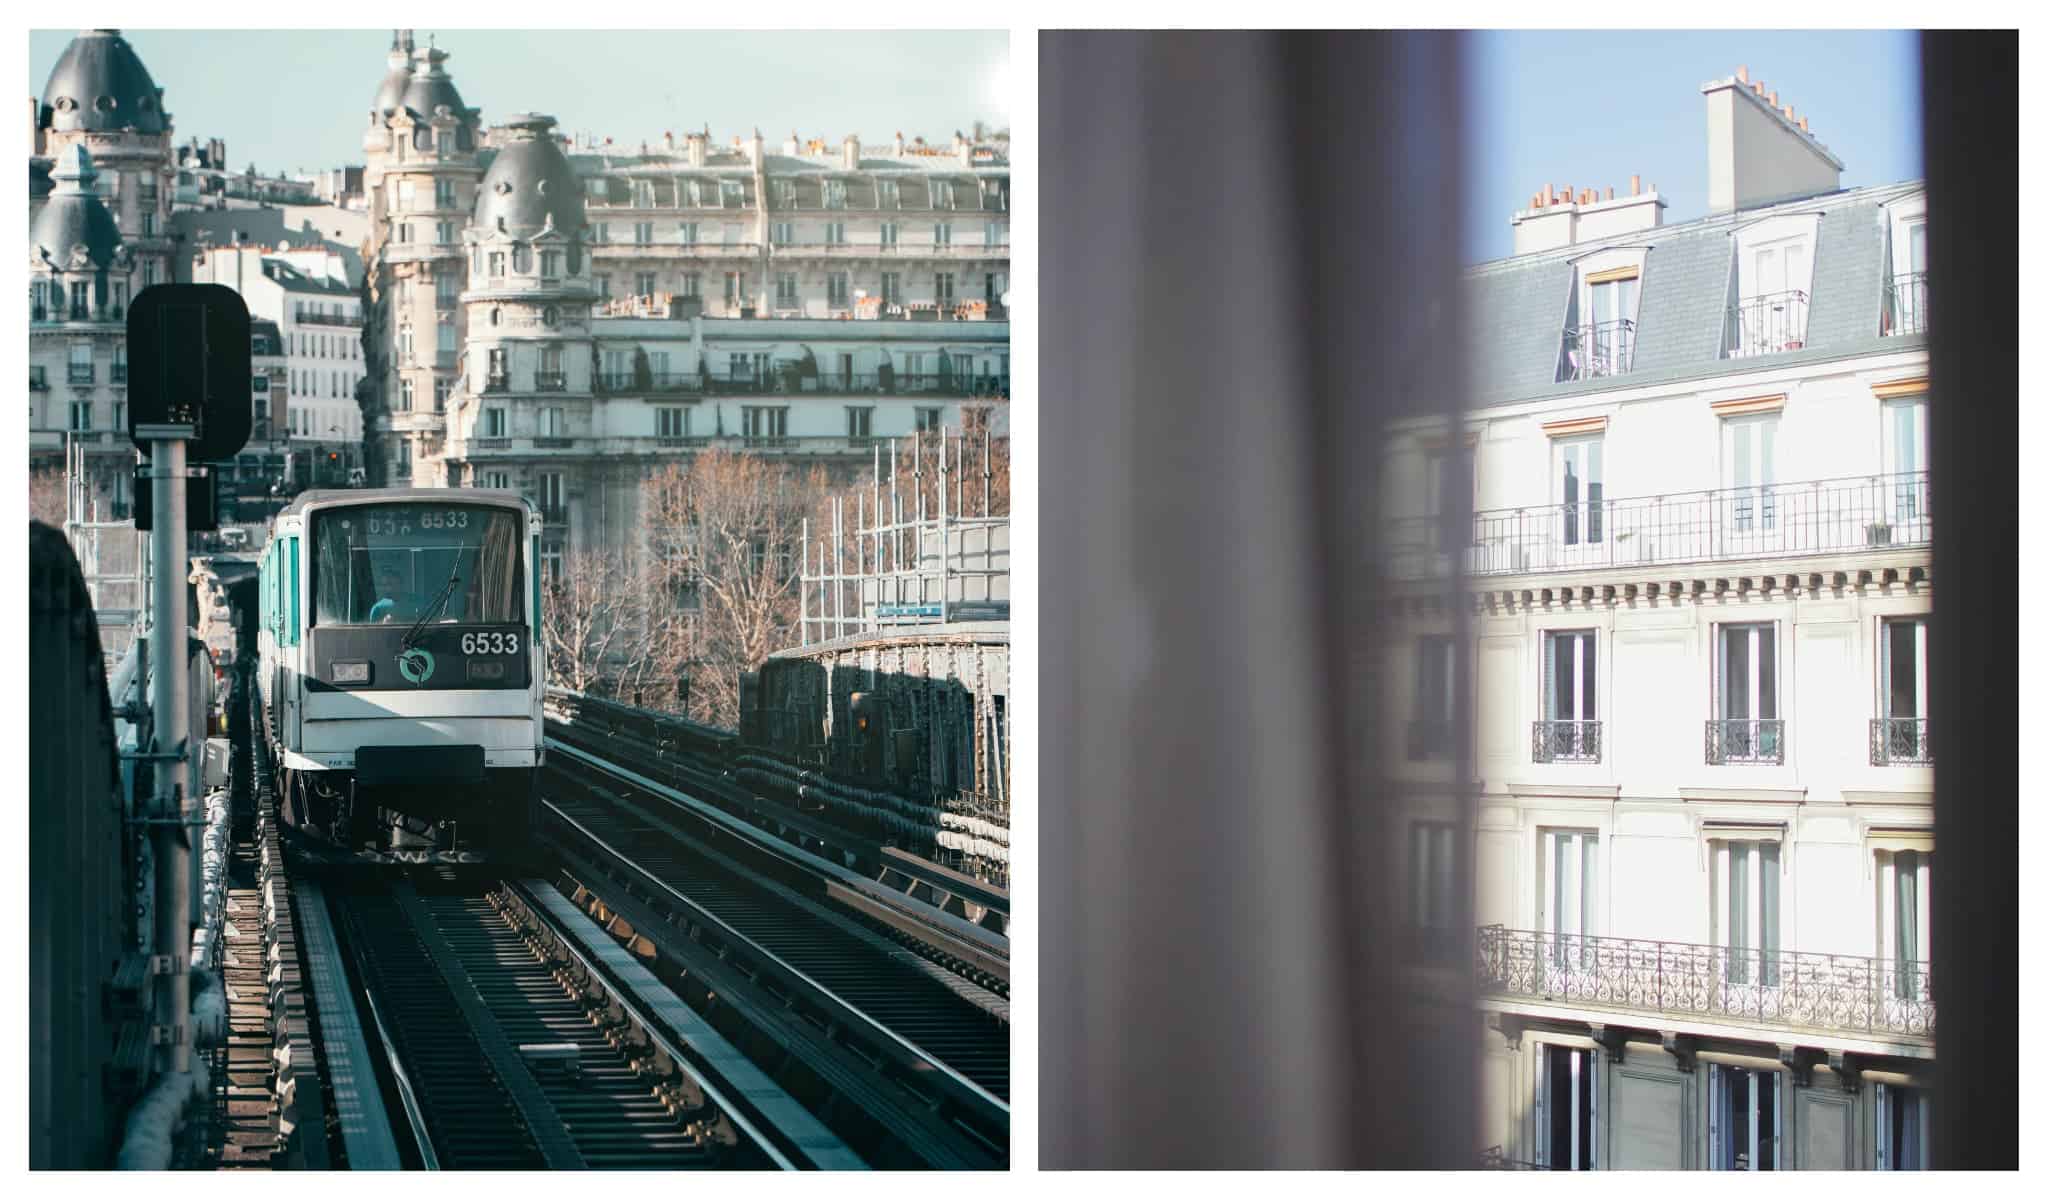 Left: Paris metro approaching the station with the Parisian cityline the background. Right: A window in Paris with a view of a building in Paris